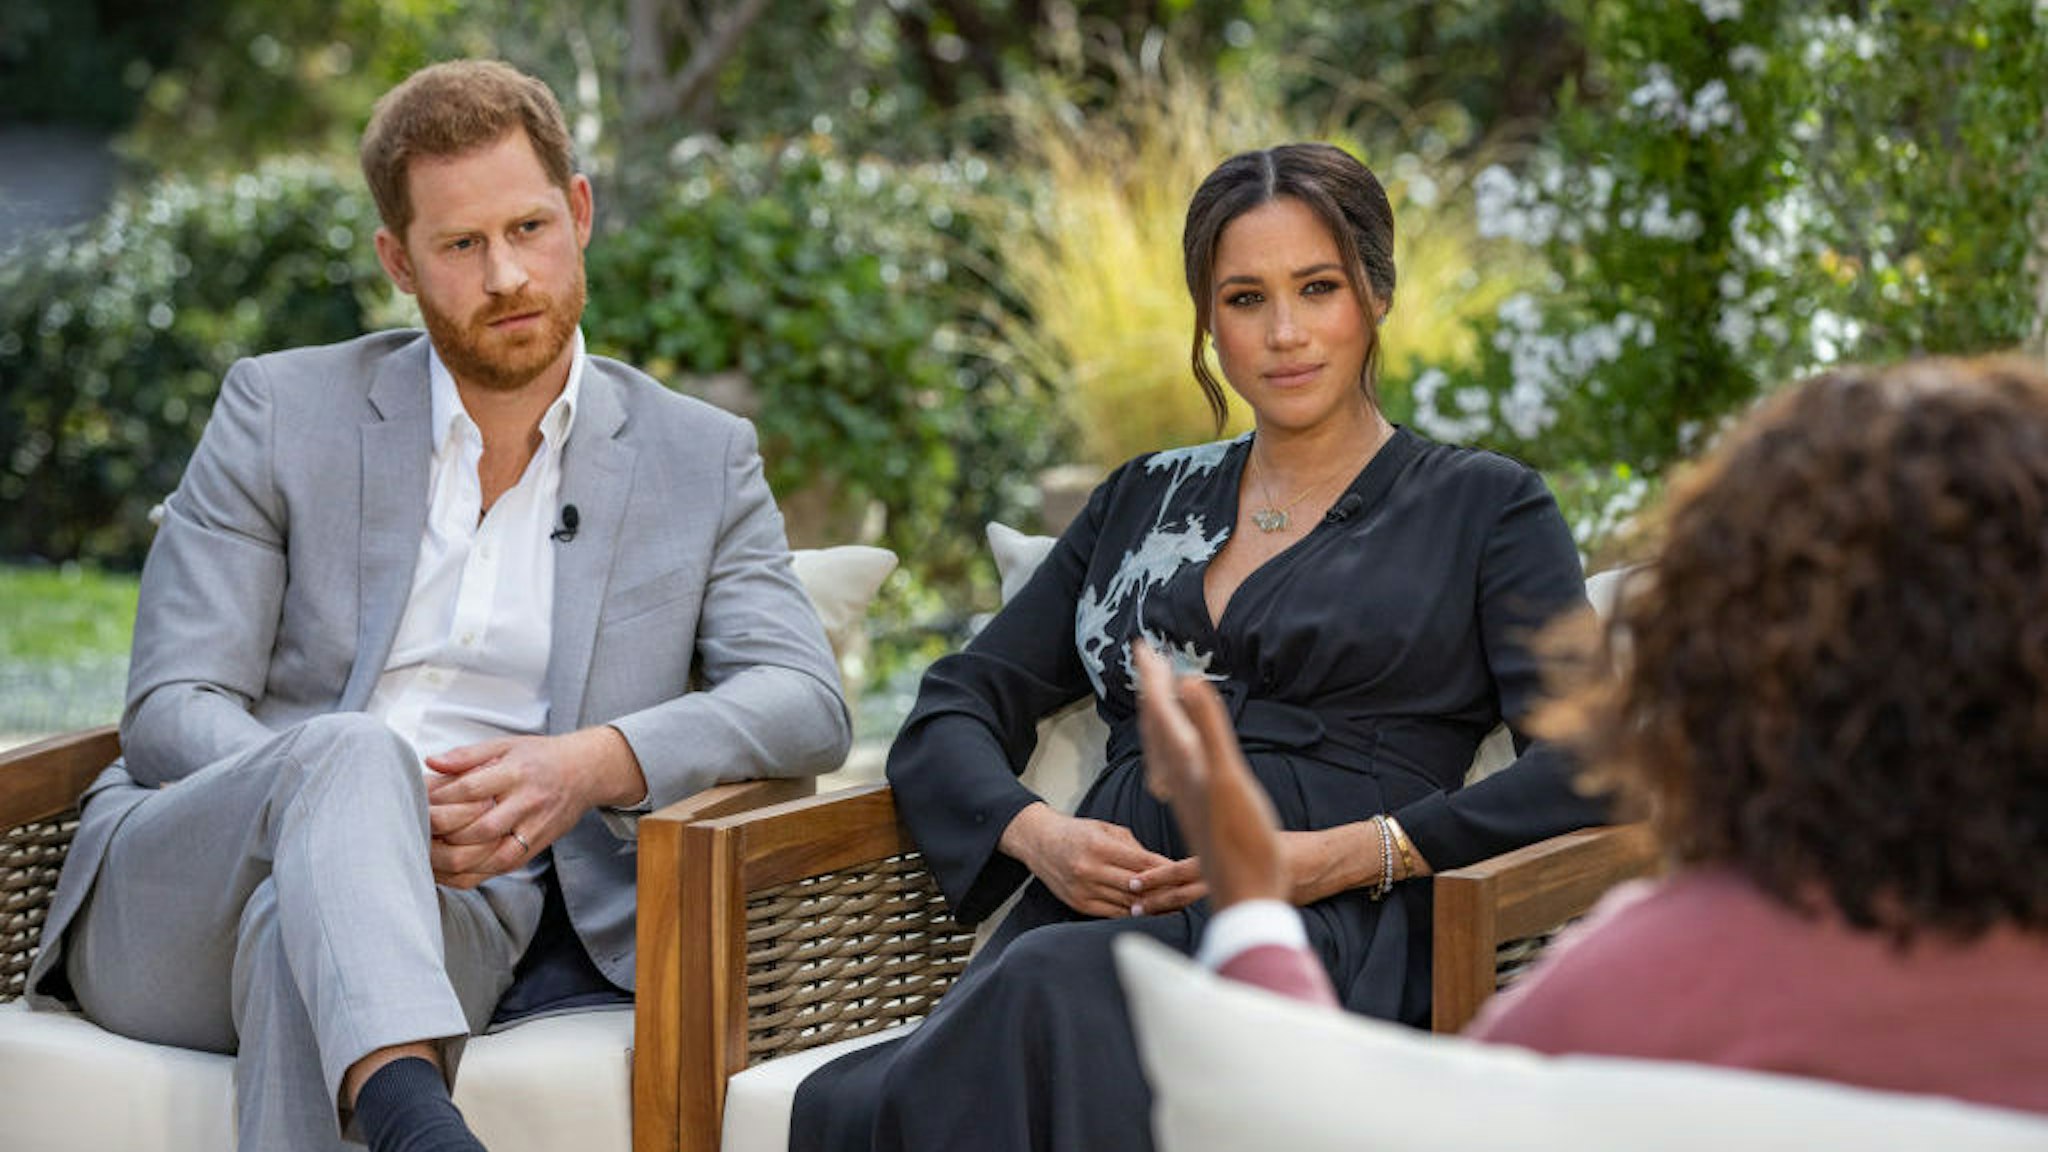 UNSPECIFIED - UNSPECIFIED: In this handout image provided by Harpo Productions and released on March 5, 2021, Oprah Winfrey interviews Prince Harry and Meghan Markle on A CBS Primetime Special premiering on CBS on March 7, 2021. (Photo by Harpo Productions/Joe Pugliese via Getty Images)